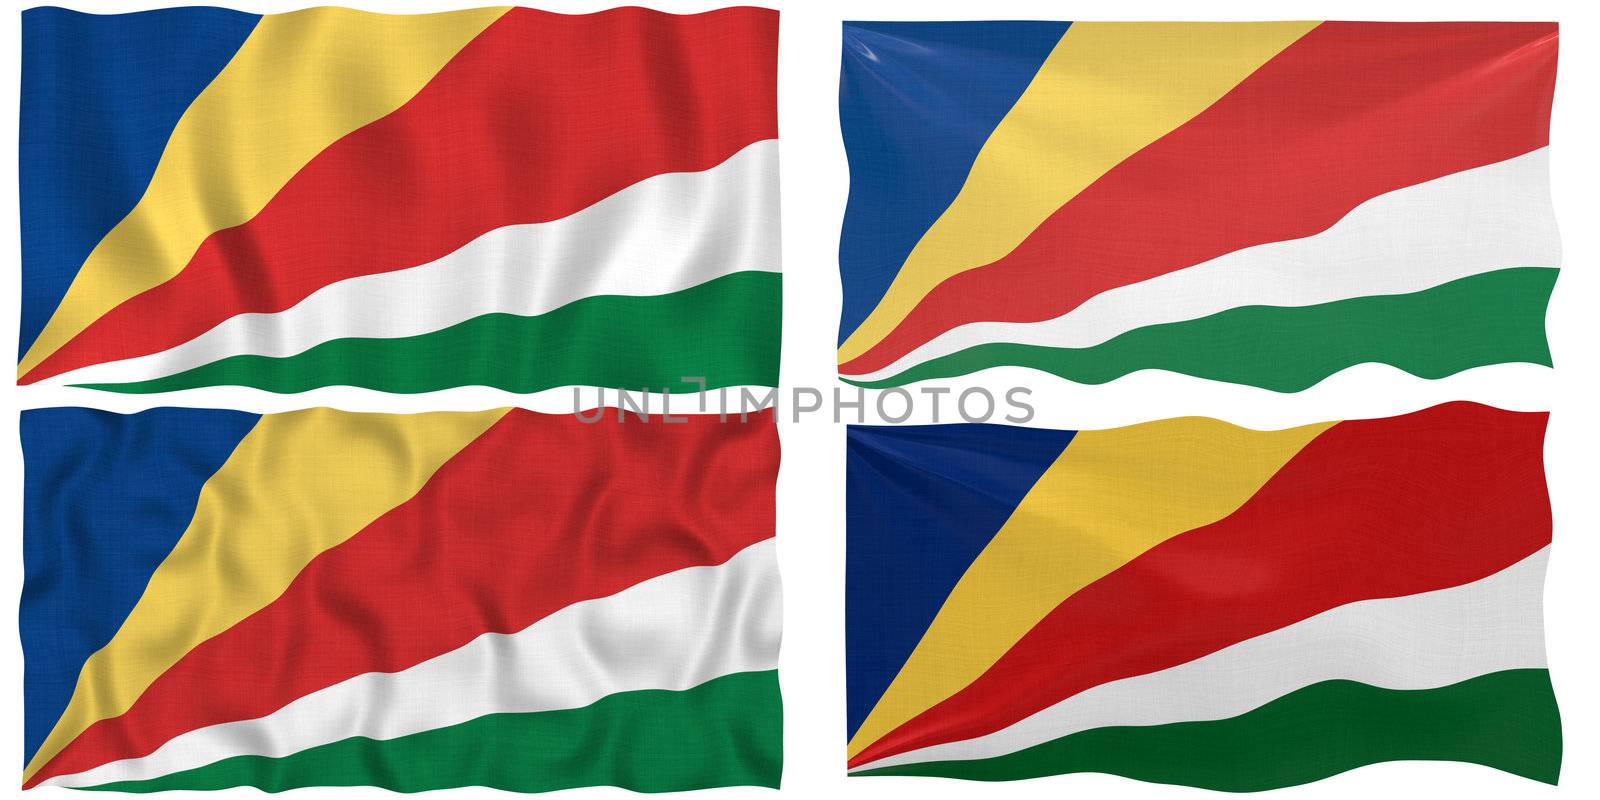 Great Image of the Flag of Seychelles